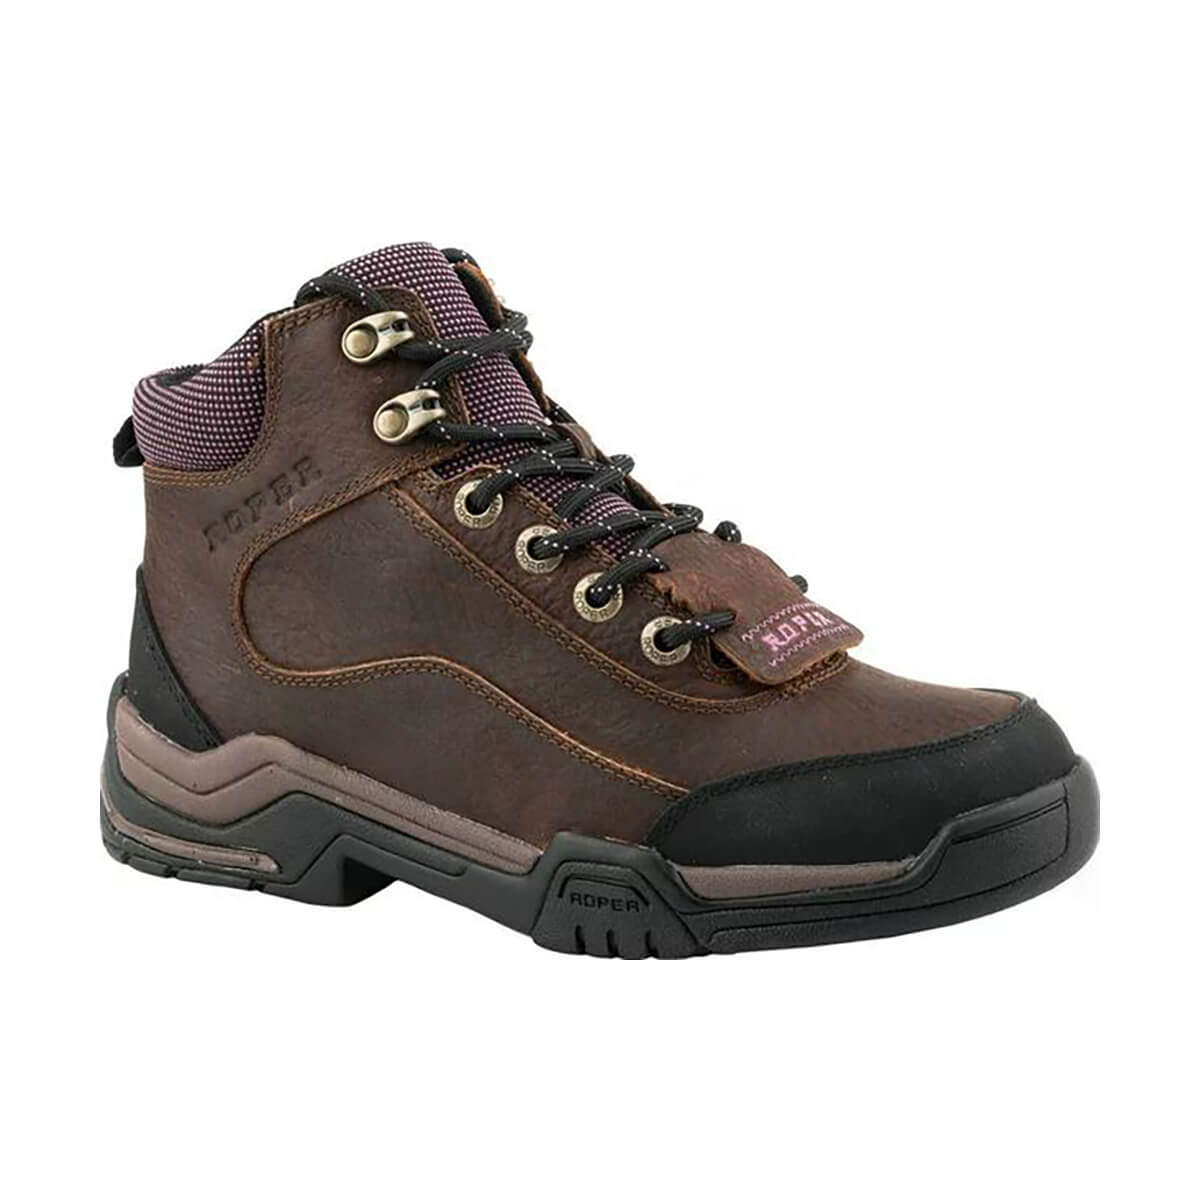 Womens Terr Kiltie Hiking Boots Ankle - 10